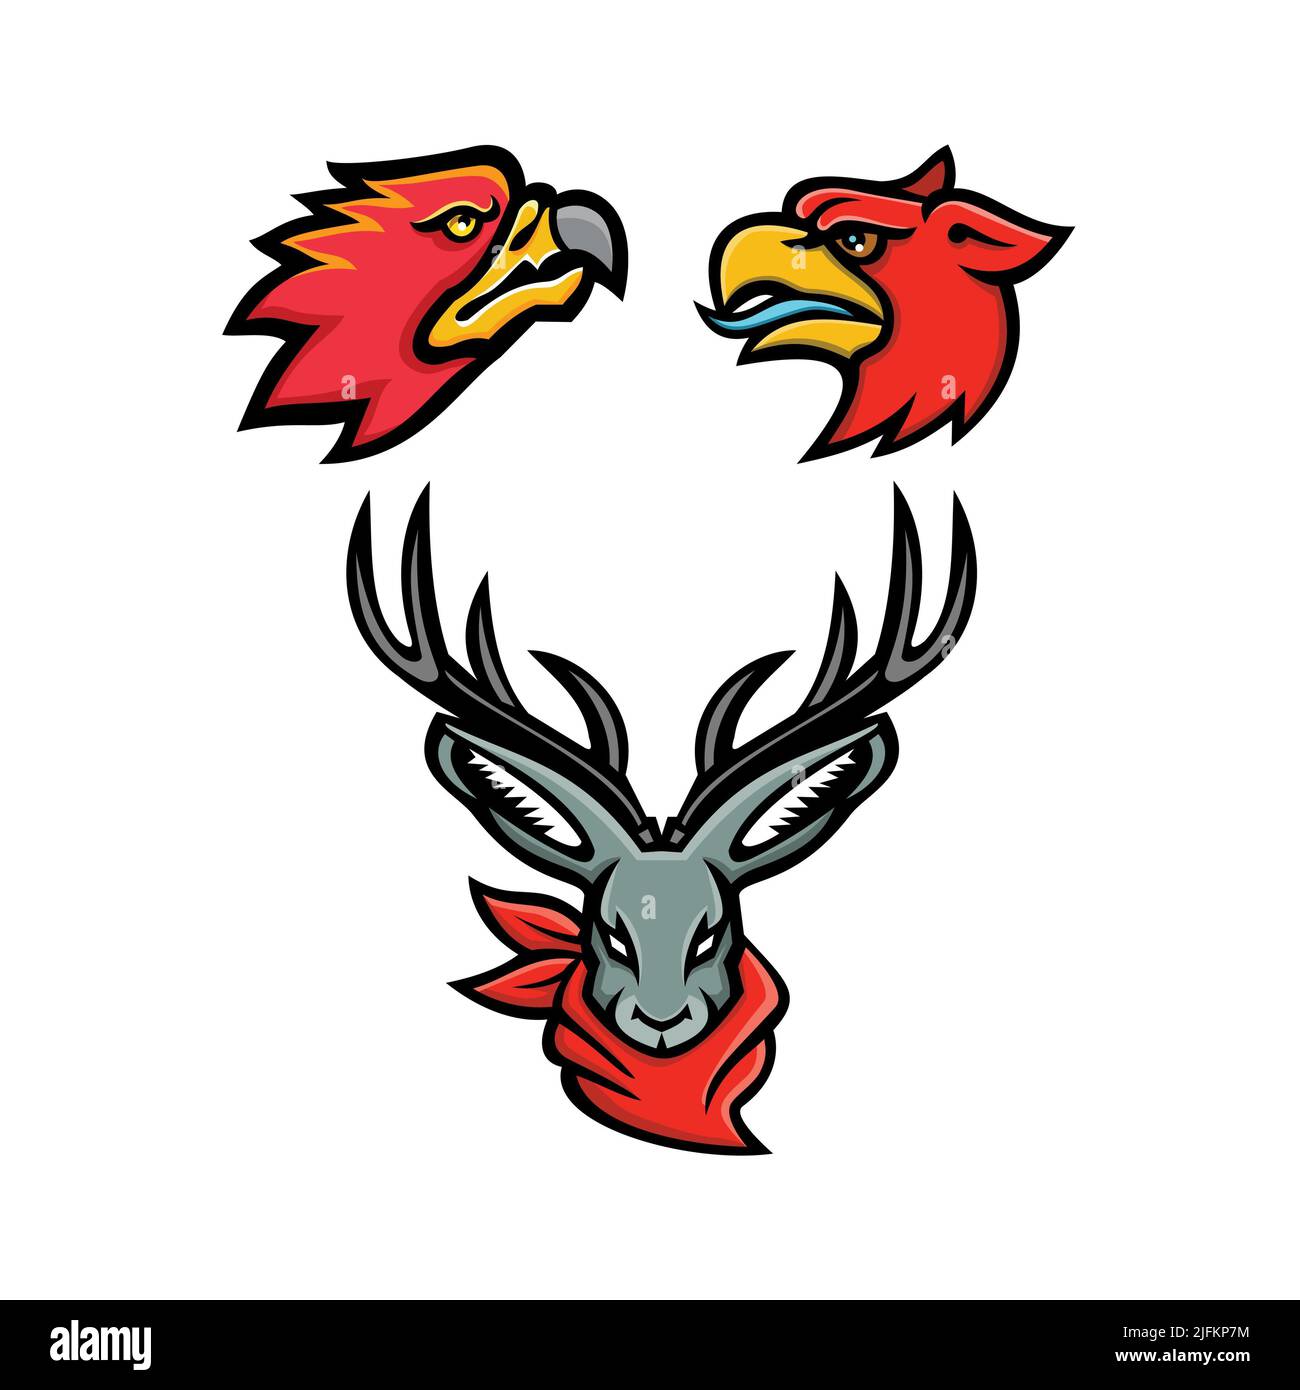 Mascot icon illustration set of heads of mythical or folklore creatures and animals like the firebird, griffin and jackalope viewed from front and Stock Photo